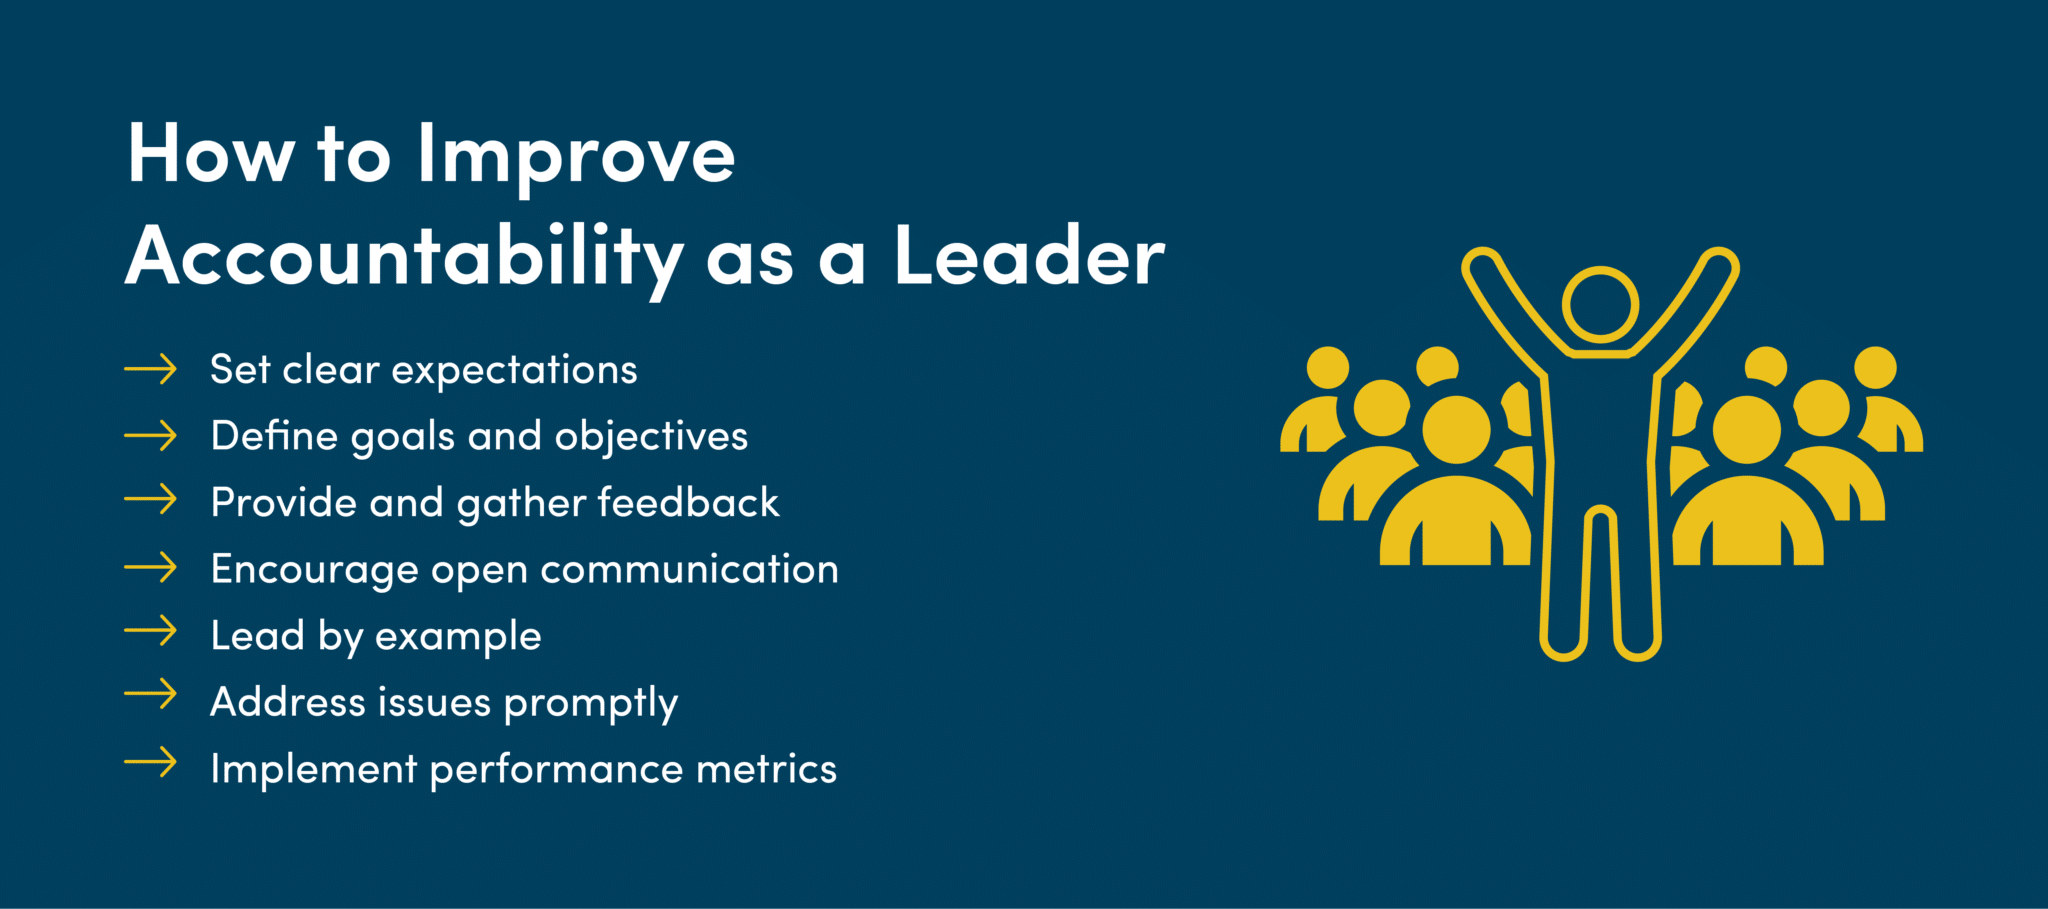 How to improve accountability as a leader